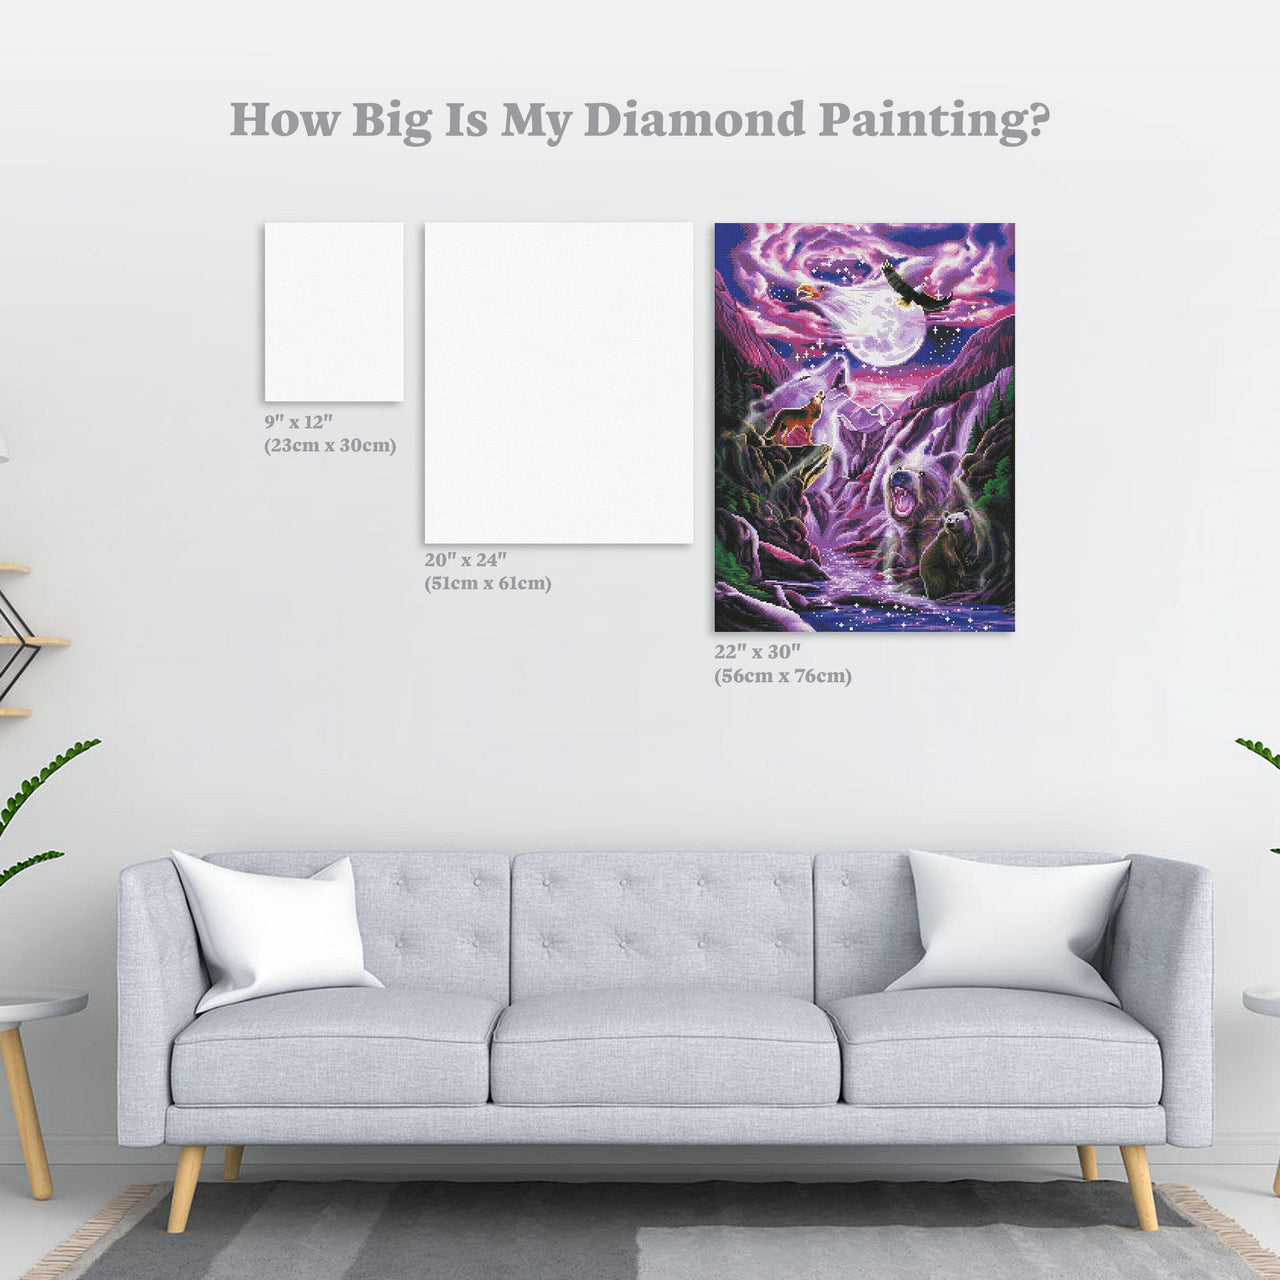 Diamond Painting Spirits 22" x 30″ (56cm x 76cm) / Round with 50 Colors including 2 ABs / 53,460